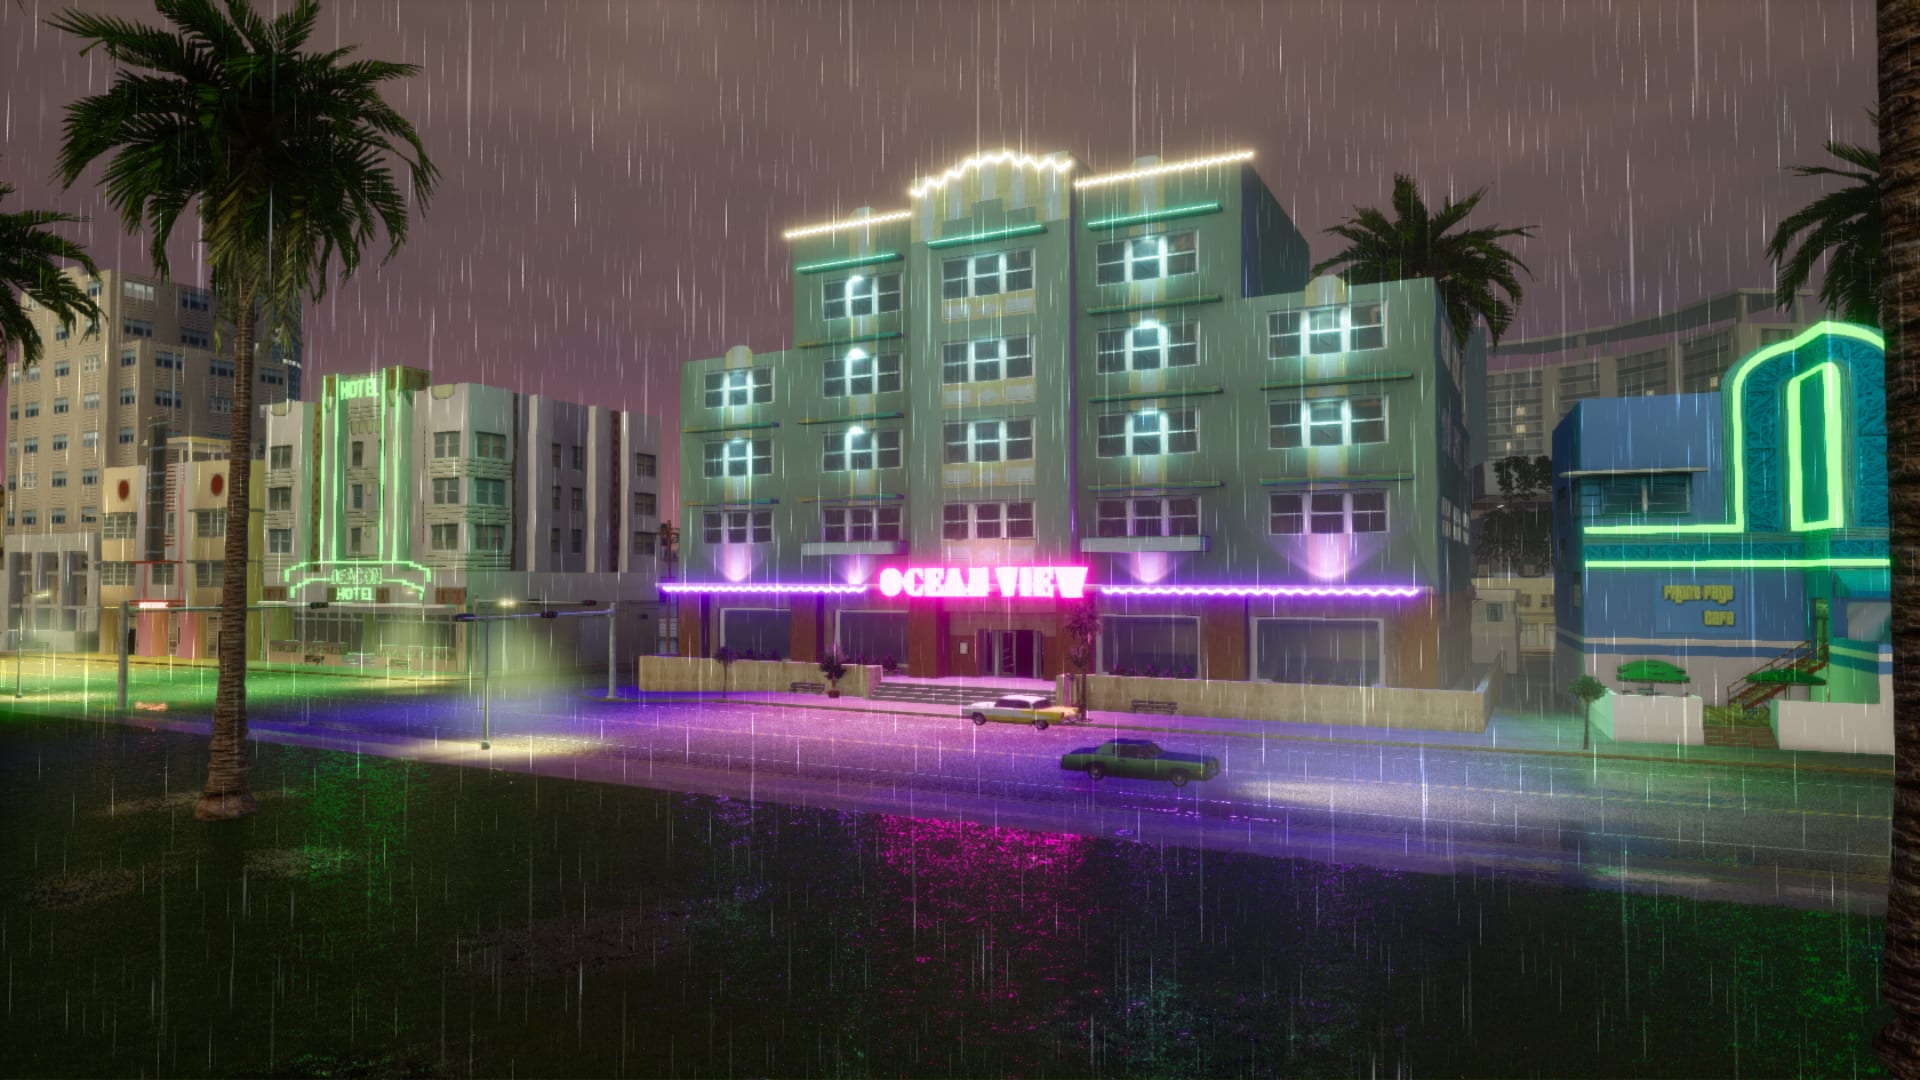 Review, Grand Theft Auto Vice City - Definitive Edition